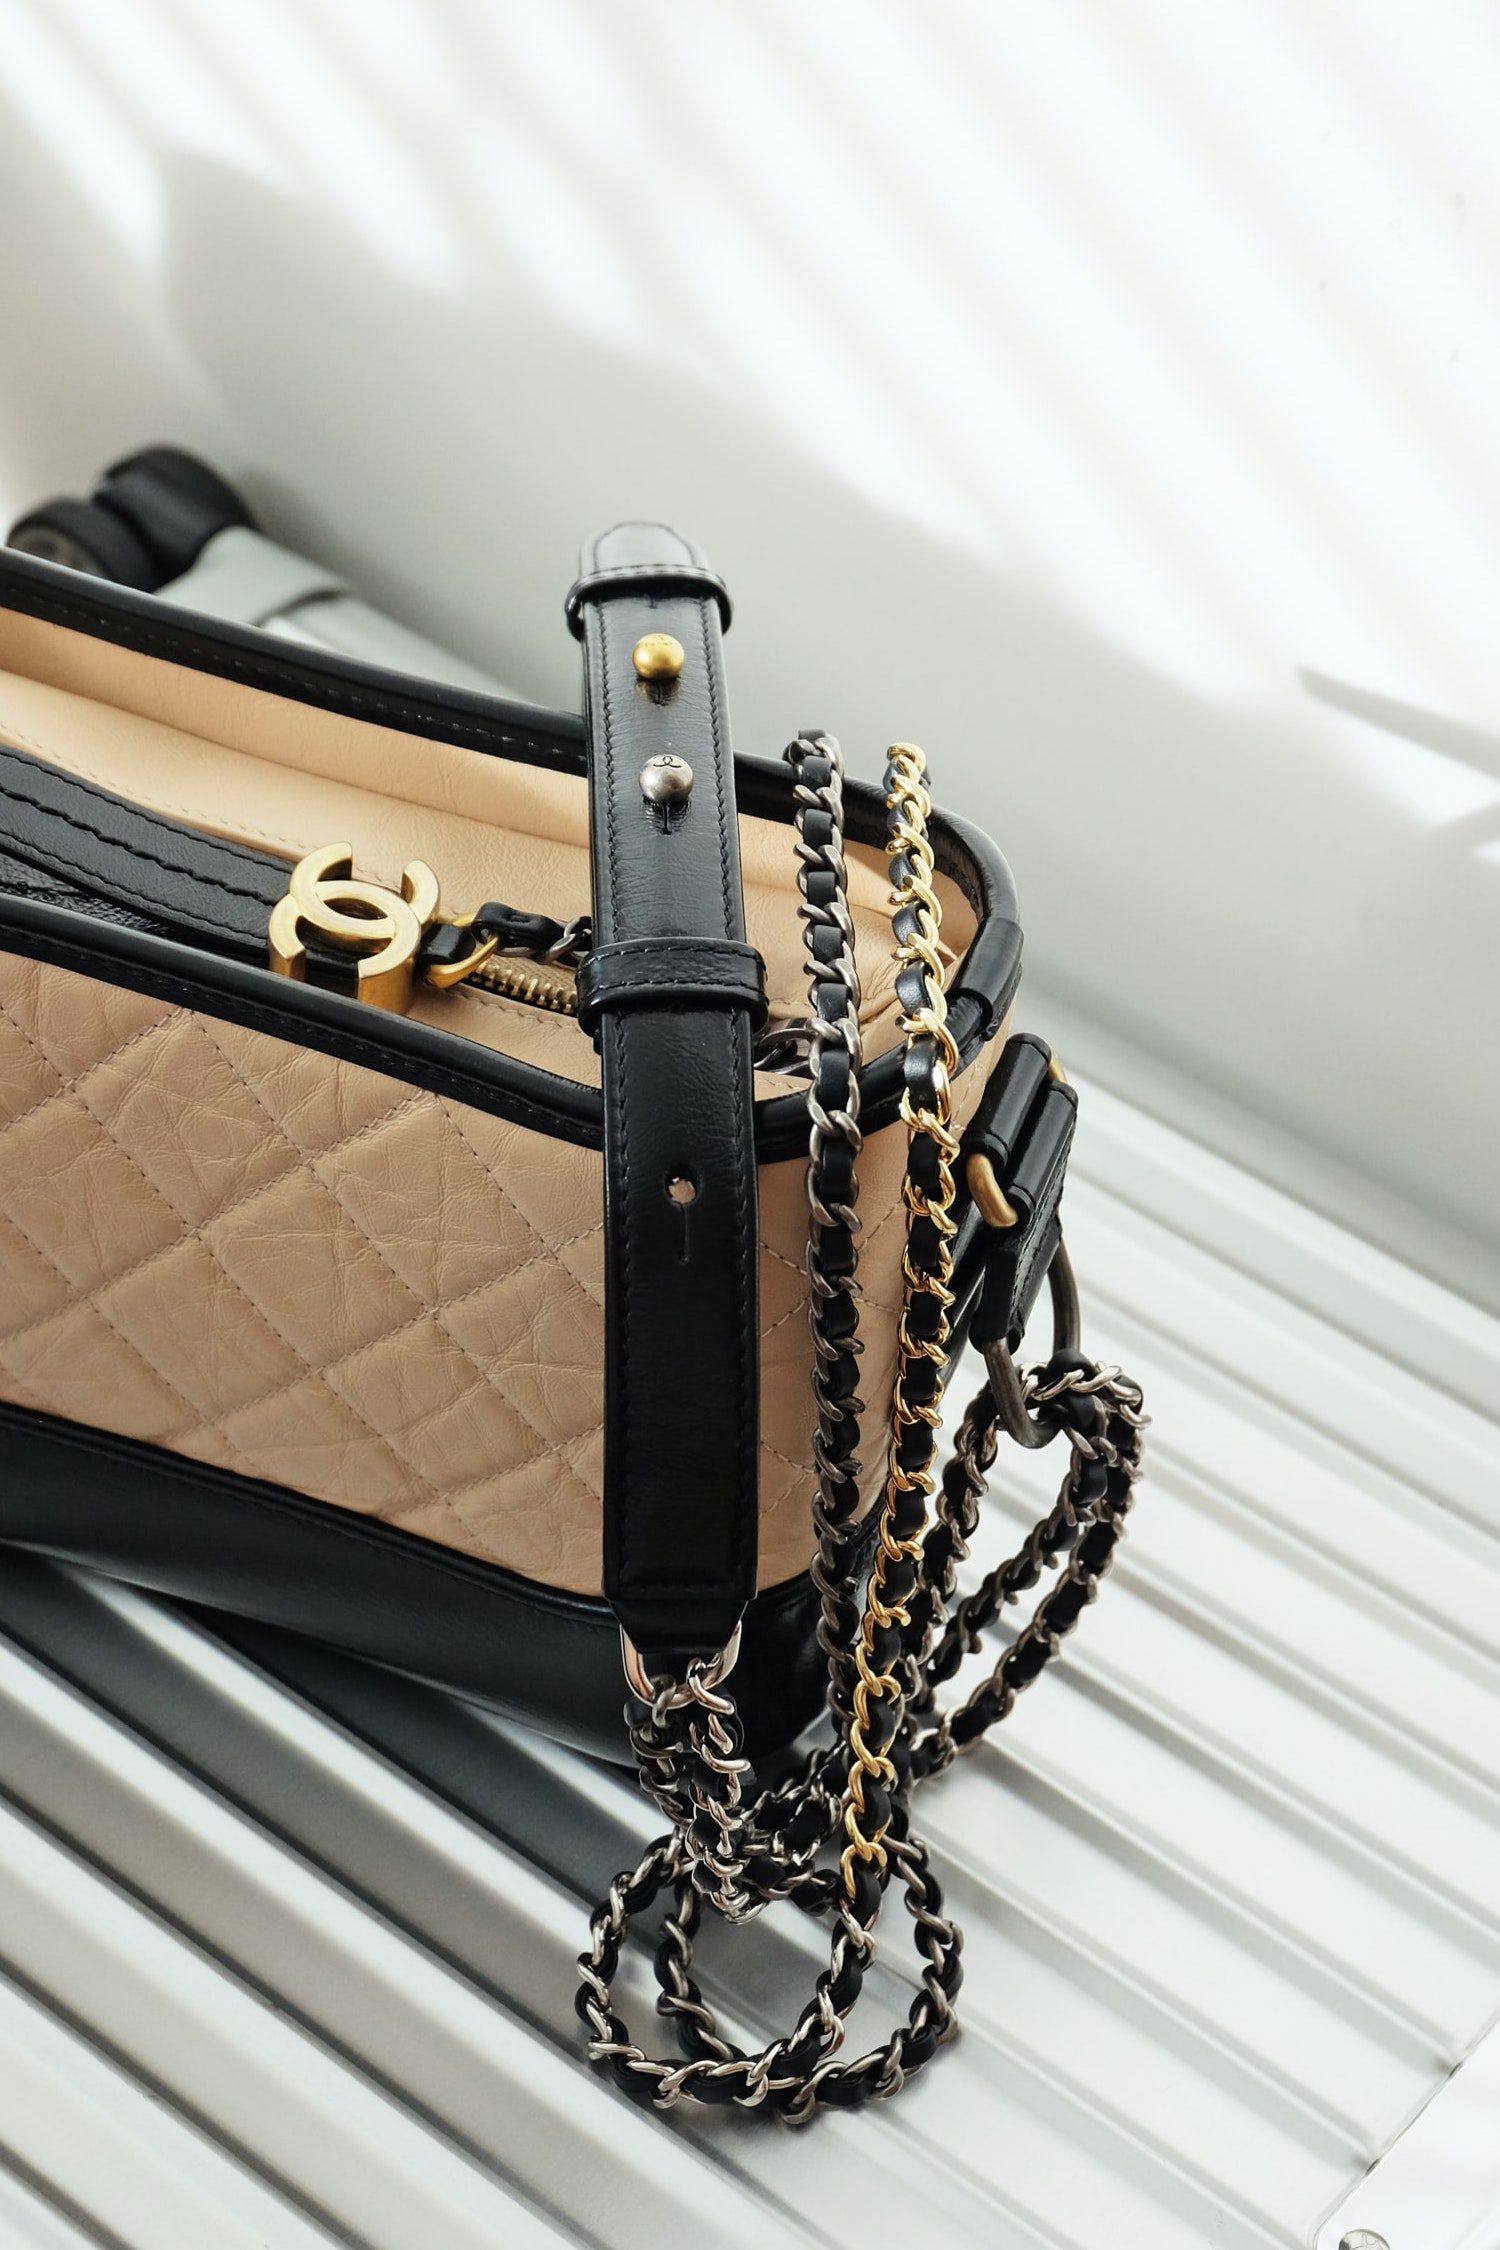 How to Get Cash for a Chanel Handbag Without Selling - Borro